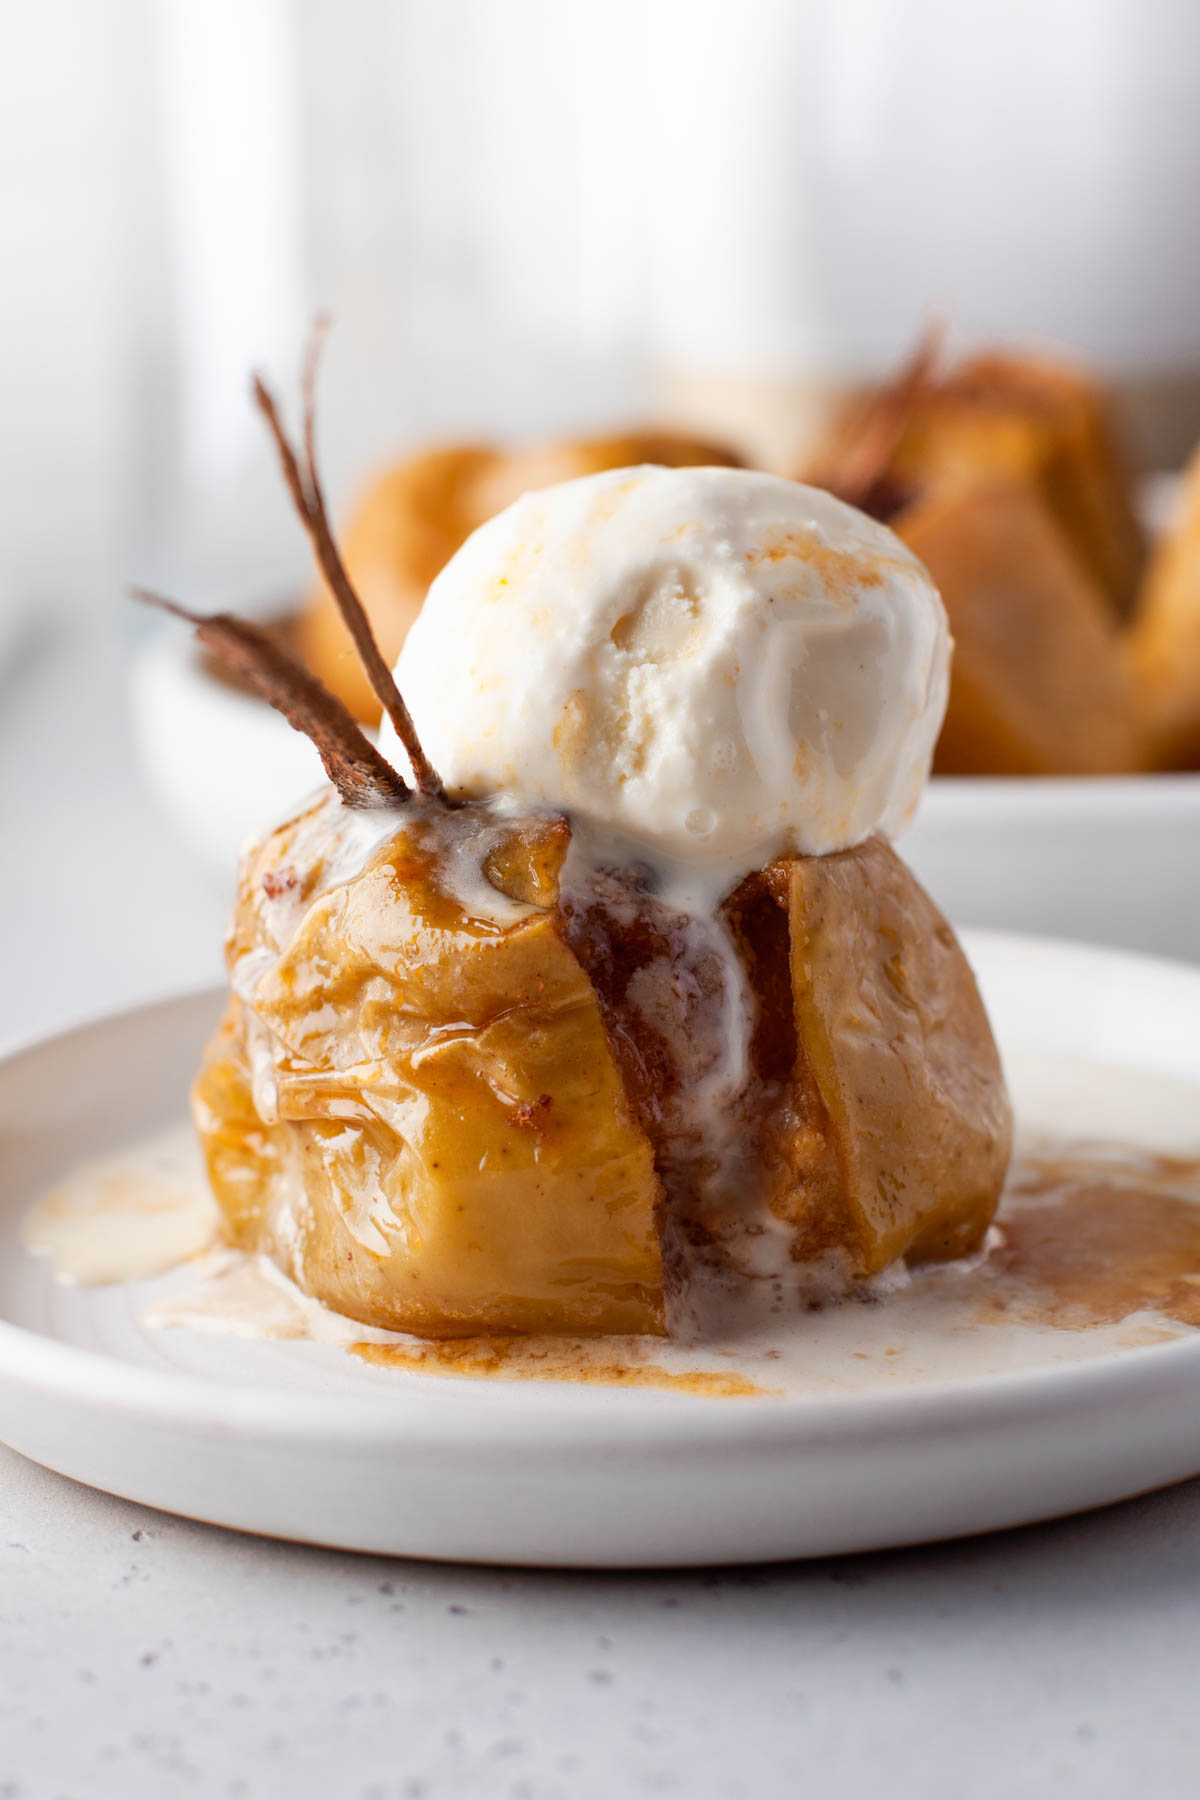 A Baked Cinnamon apple on a white plate topped with a scoop of vanilla ice cream.